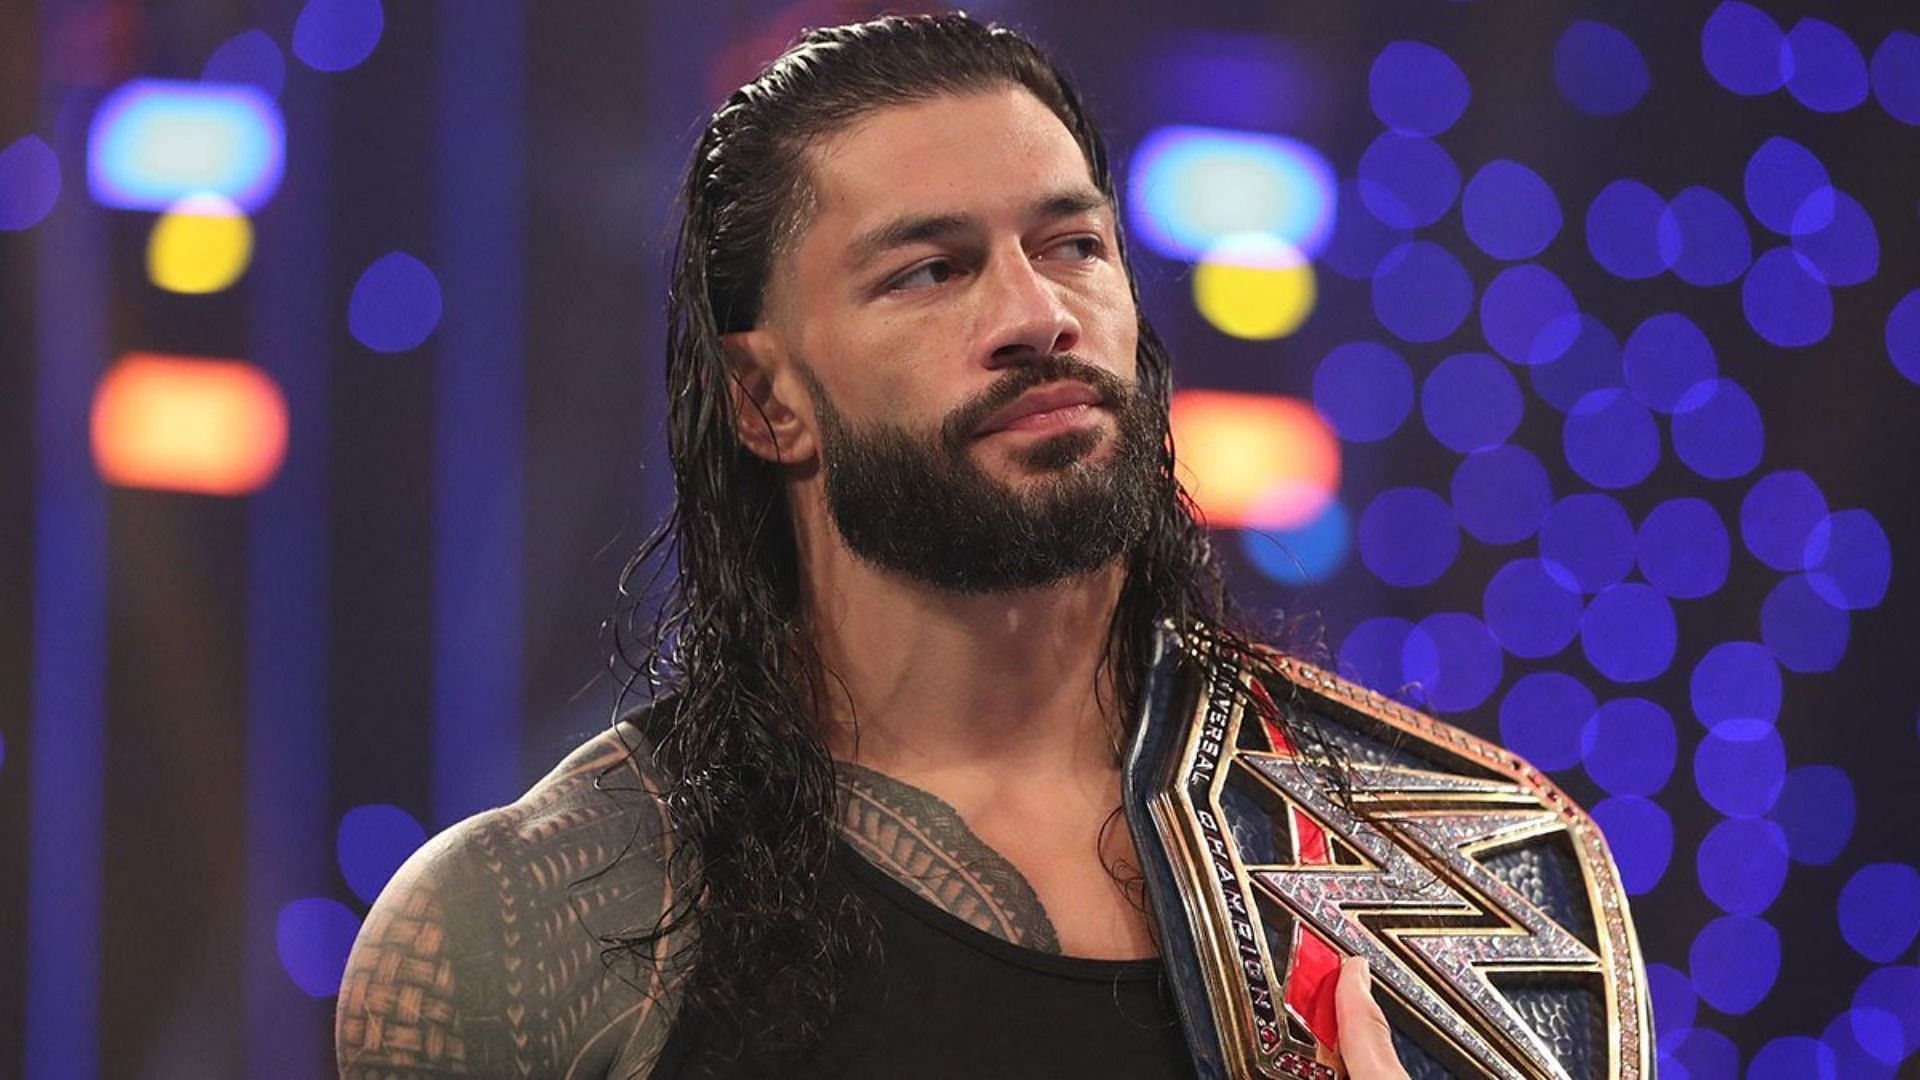 Roman Reigns has now held the Universal Championship for 434+ days